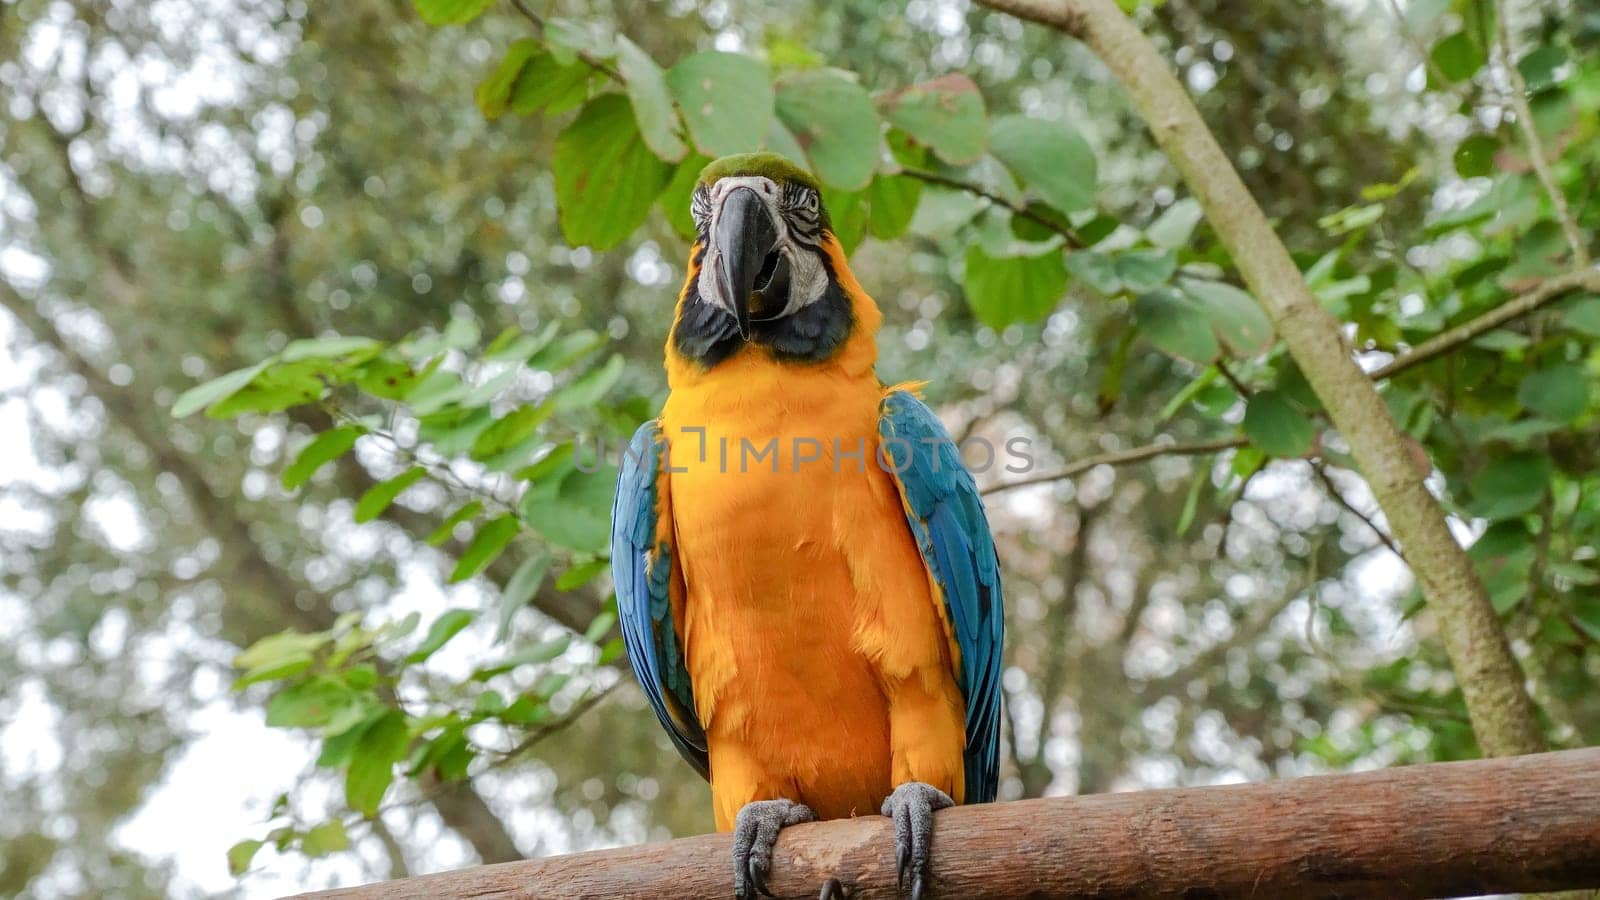 Brightly colored parrot on a branch with blurred foliage in the background by JuliaDorian